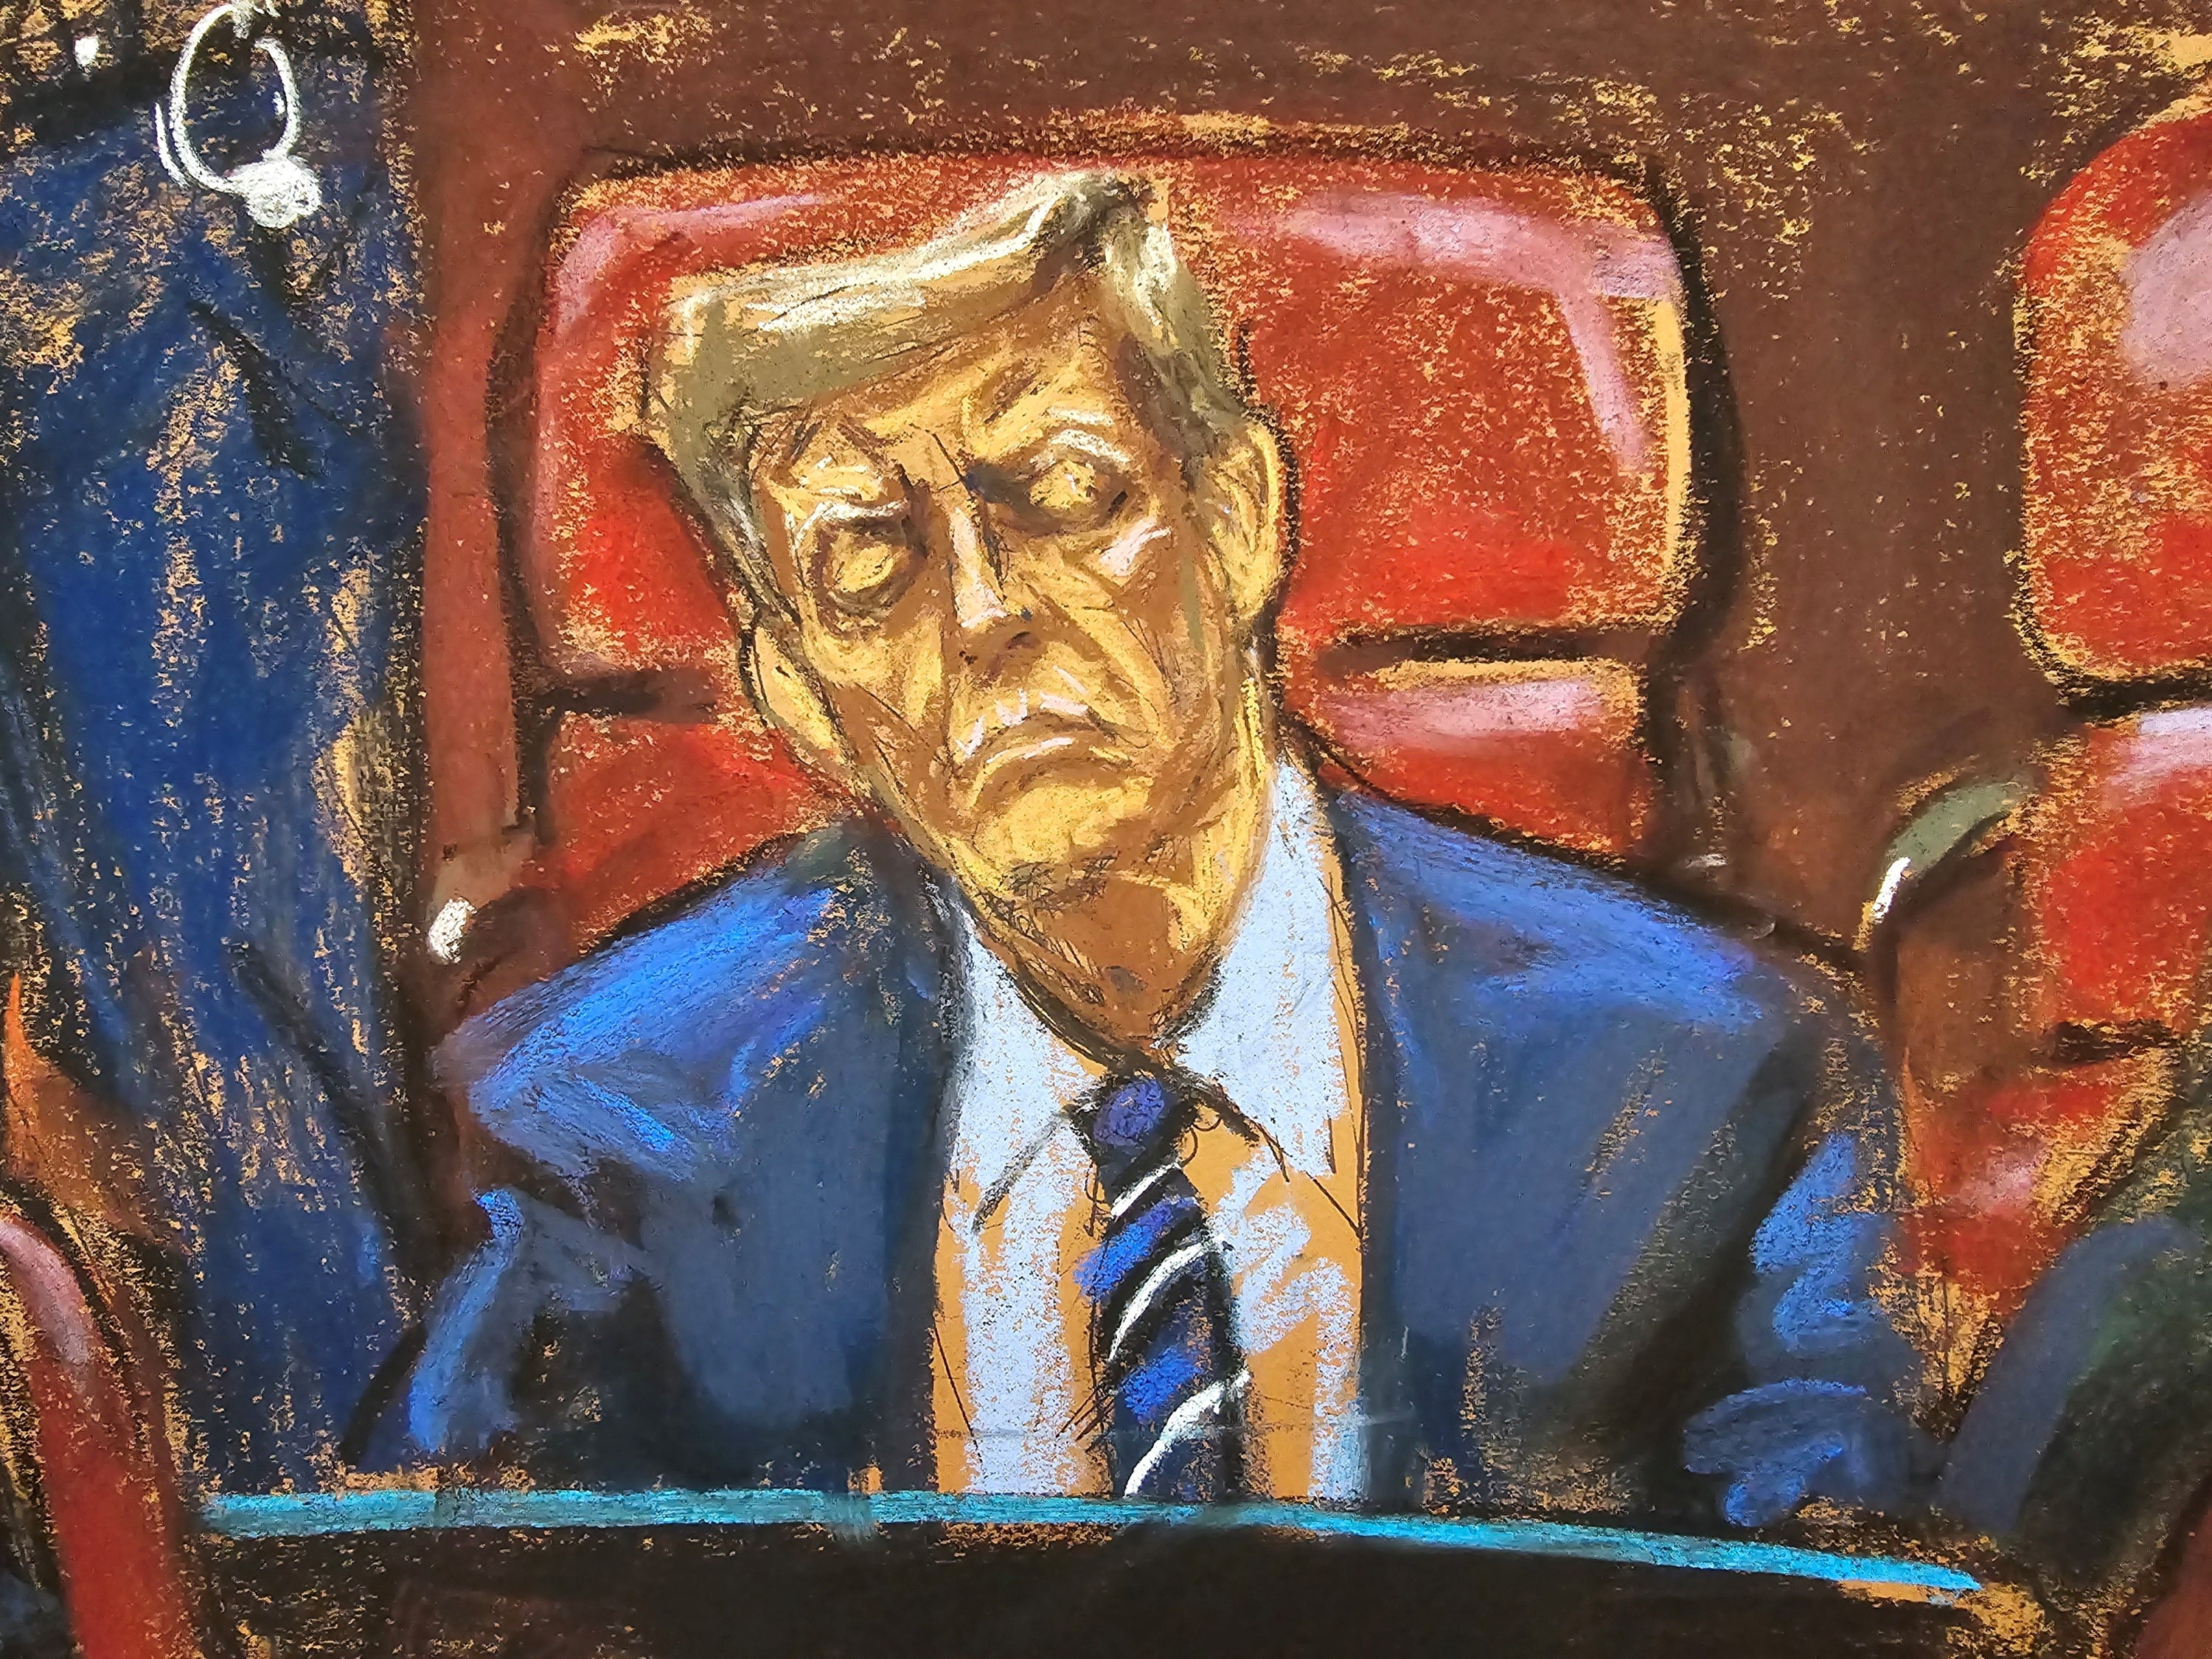 A previous courtroom sketch appeared to show Mr Trump dozing off during proceedings in Manhattan